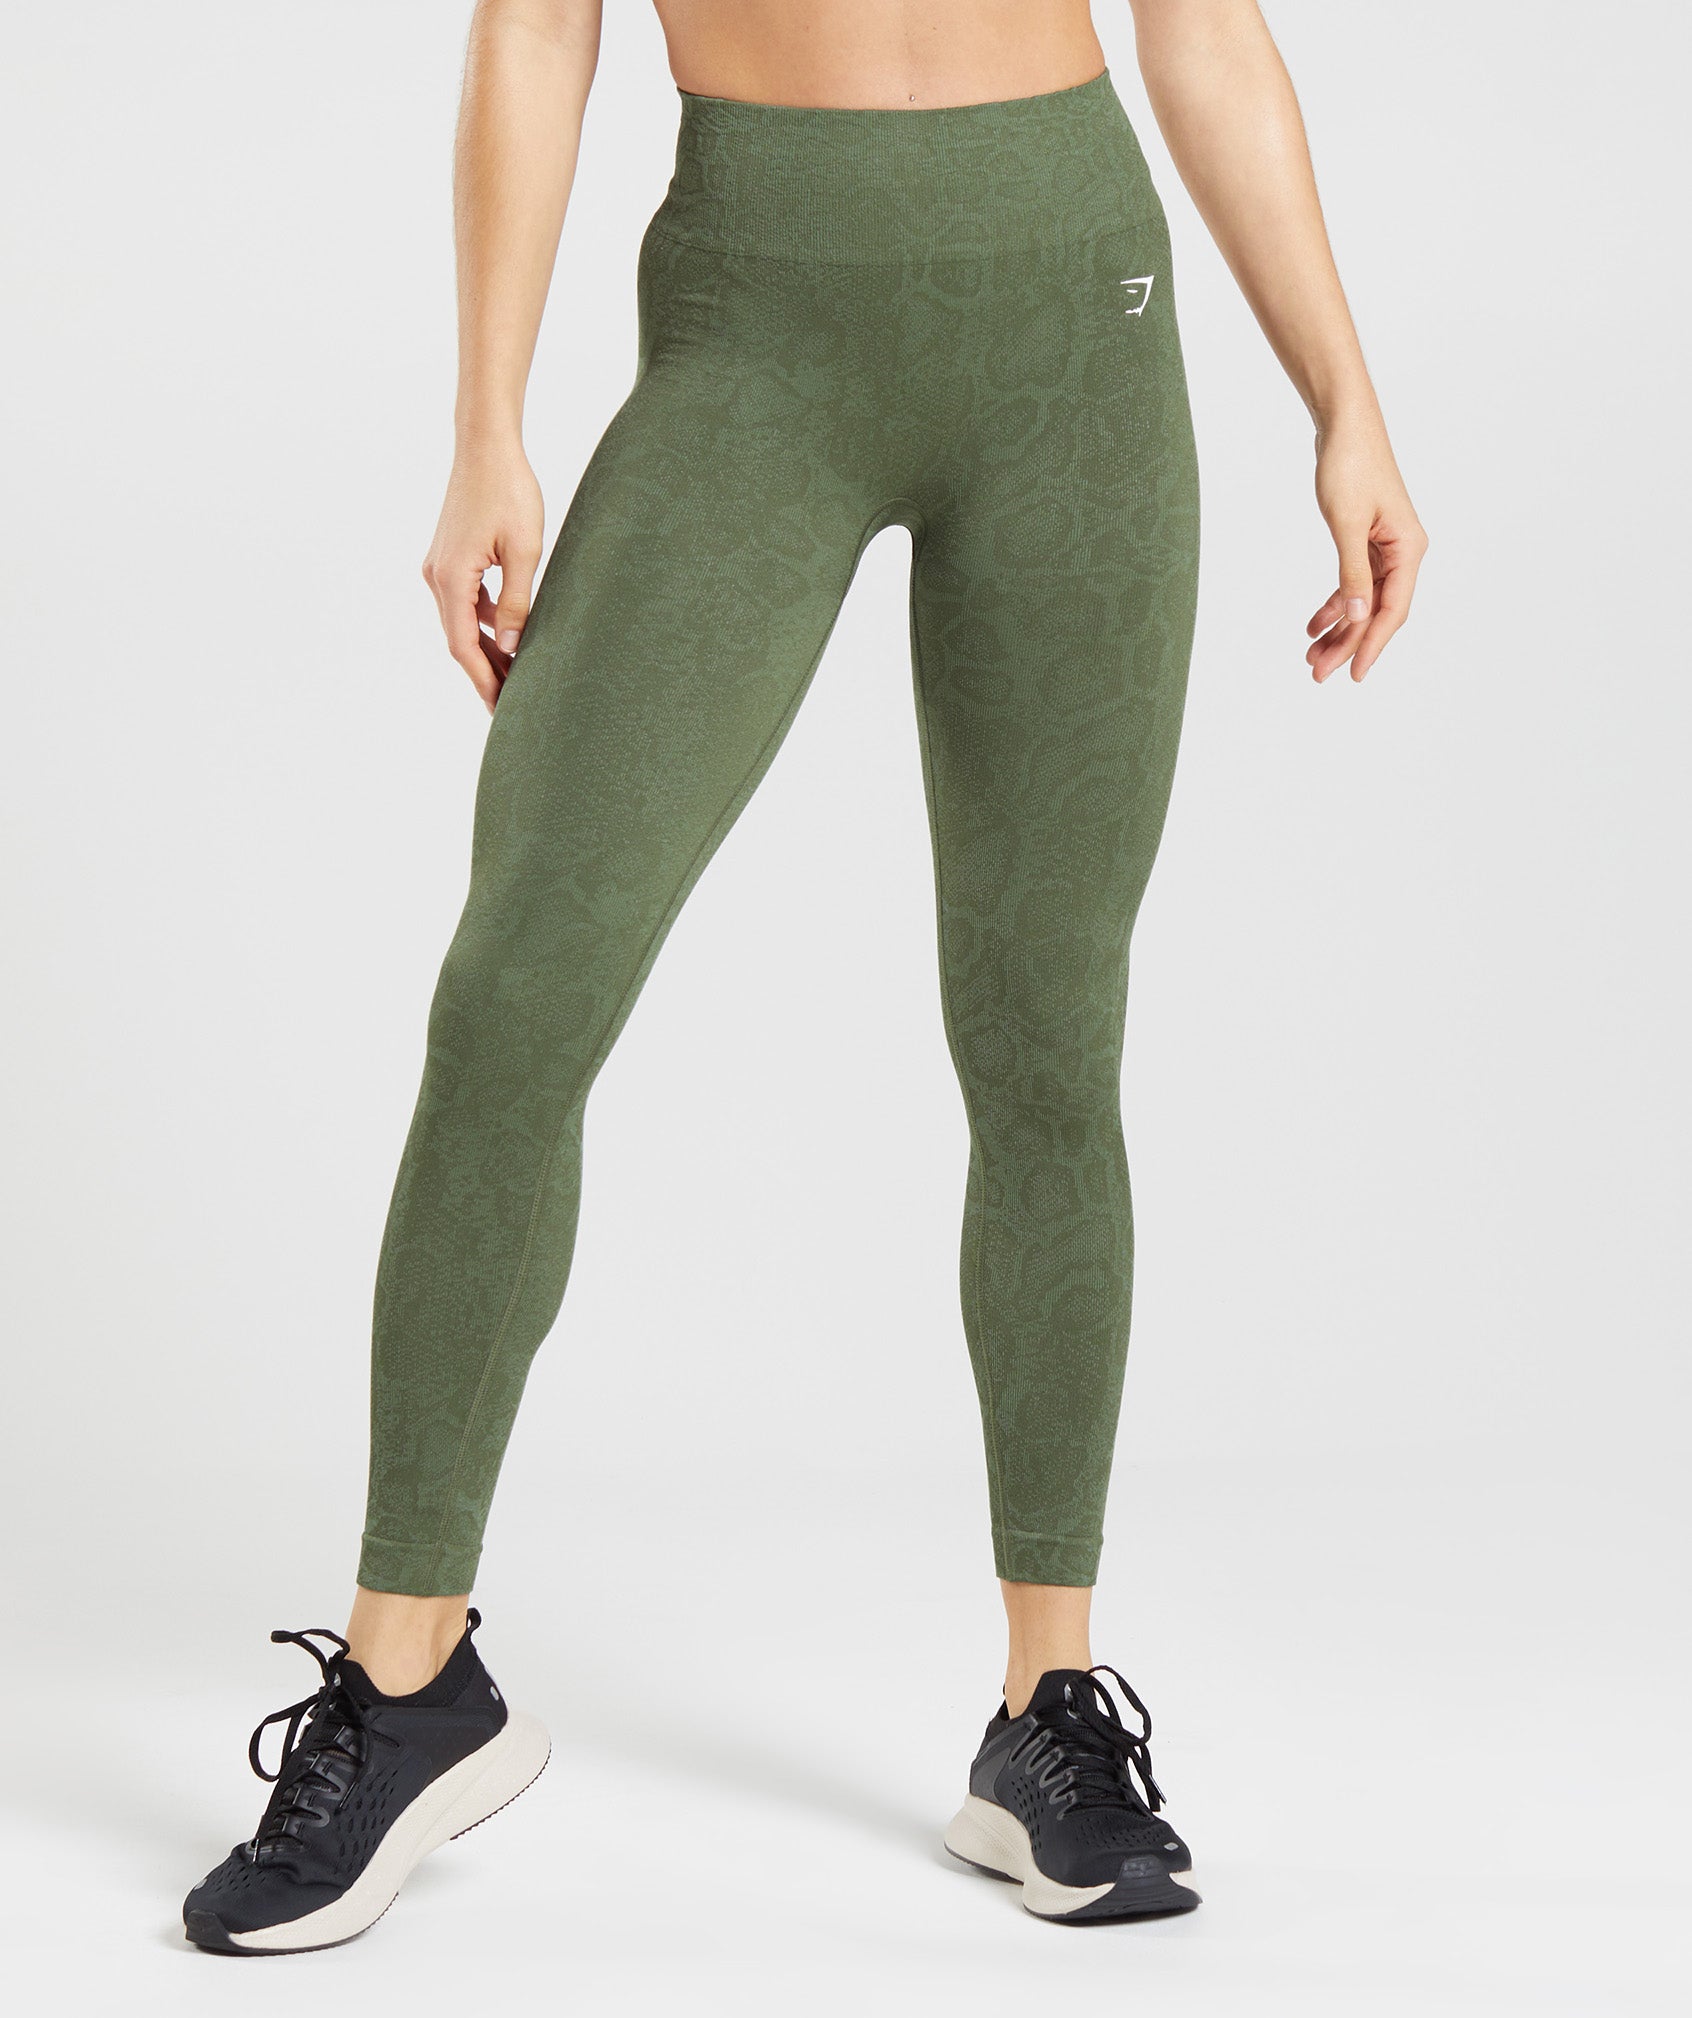 Gymshark Elevate Compression Leggings Womens Willow Green Size Small